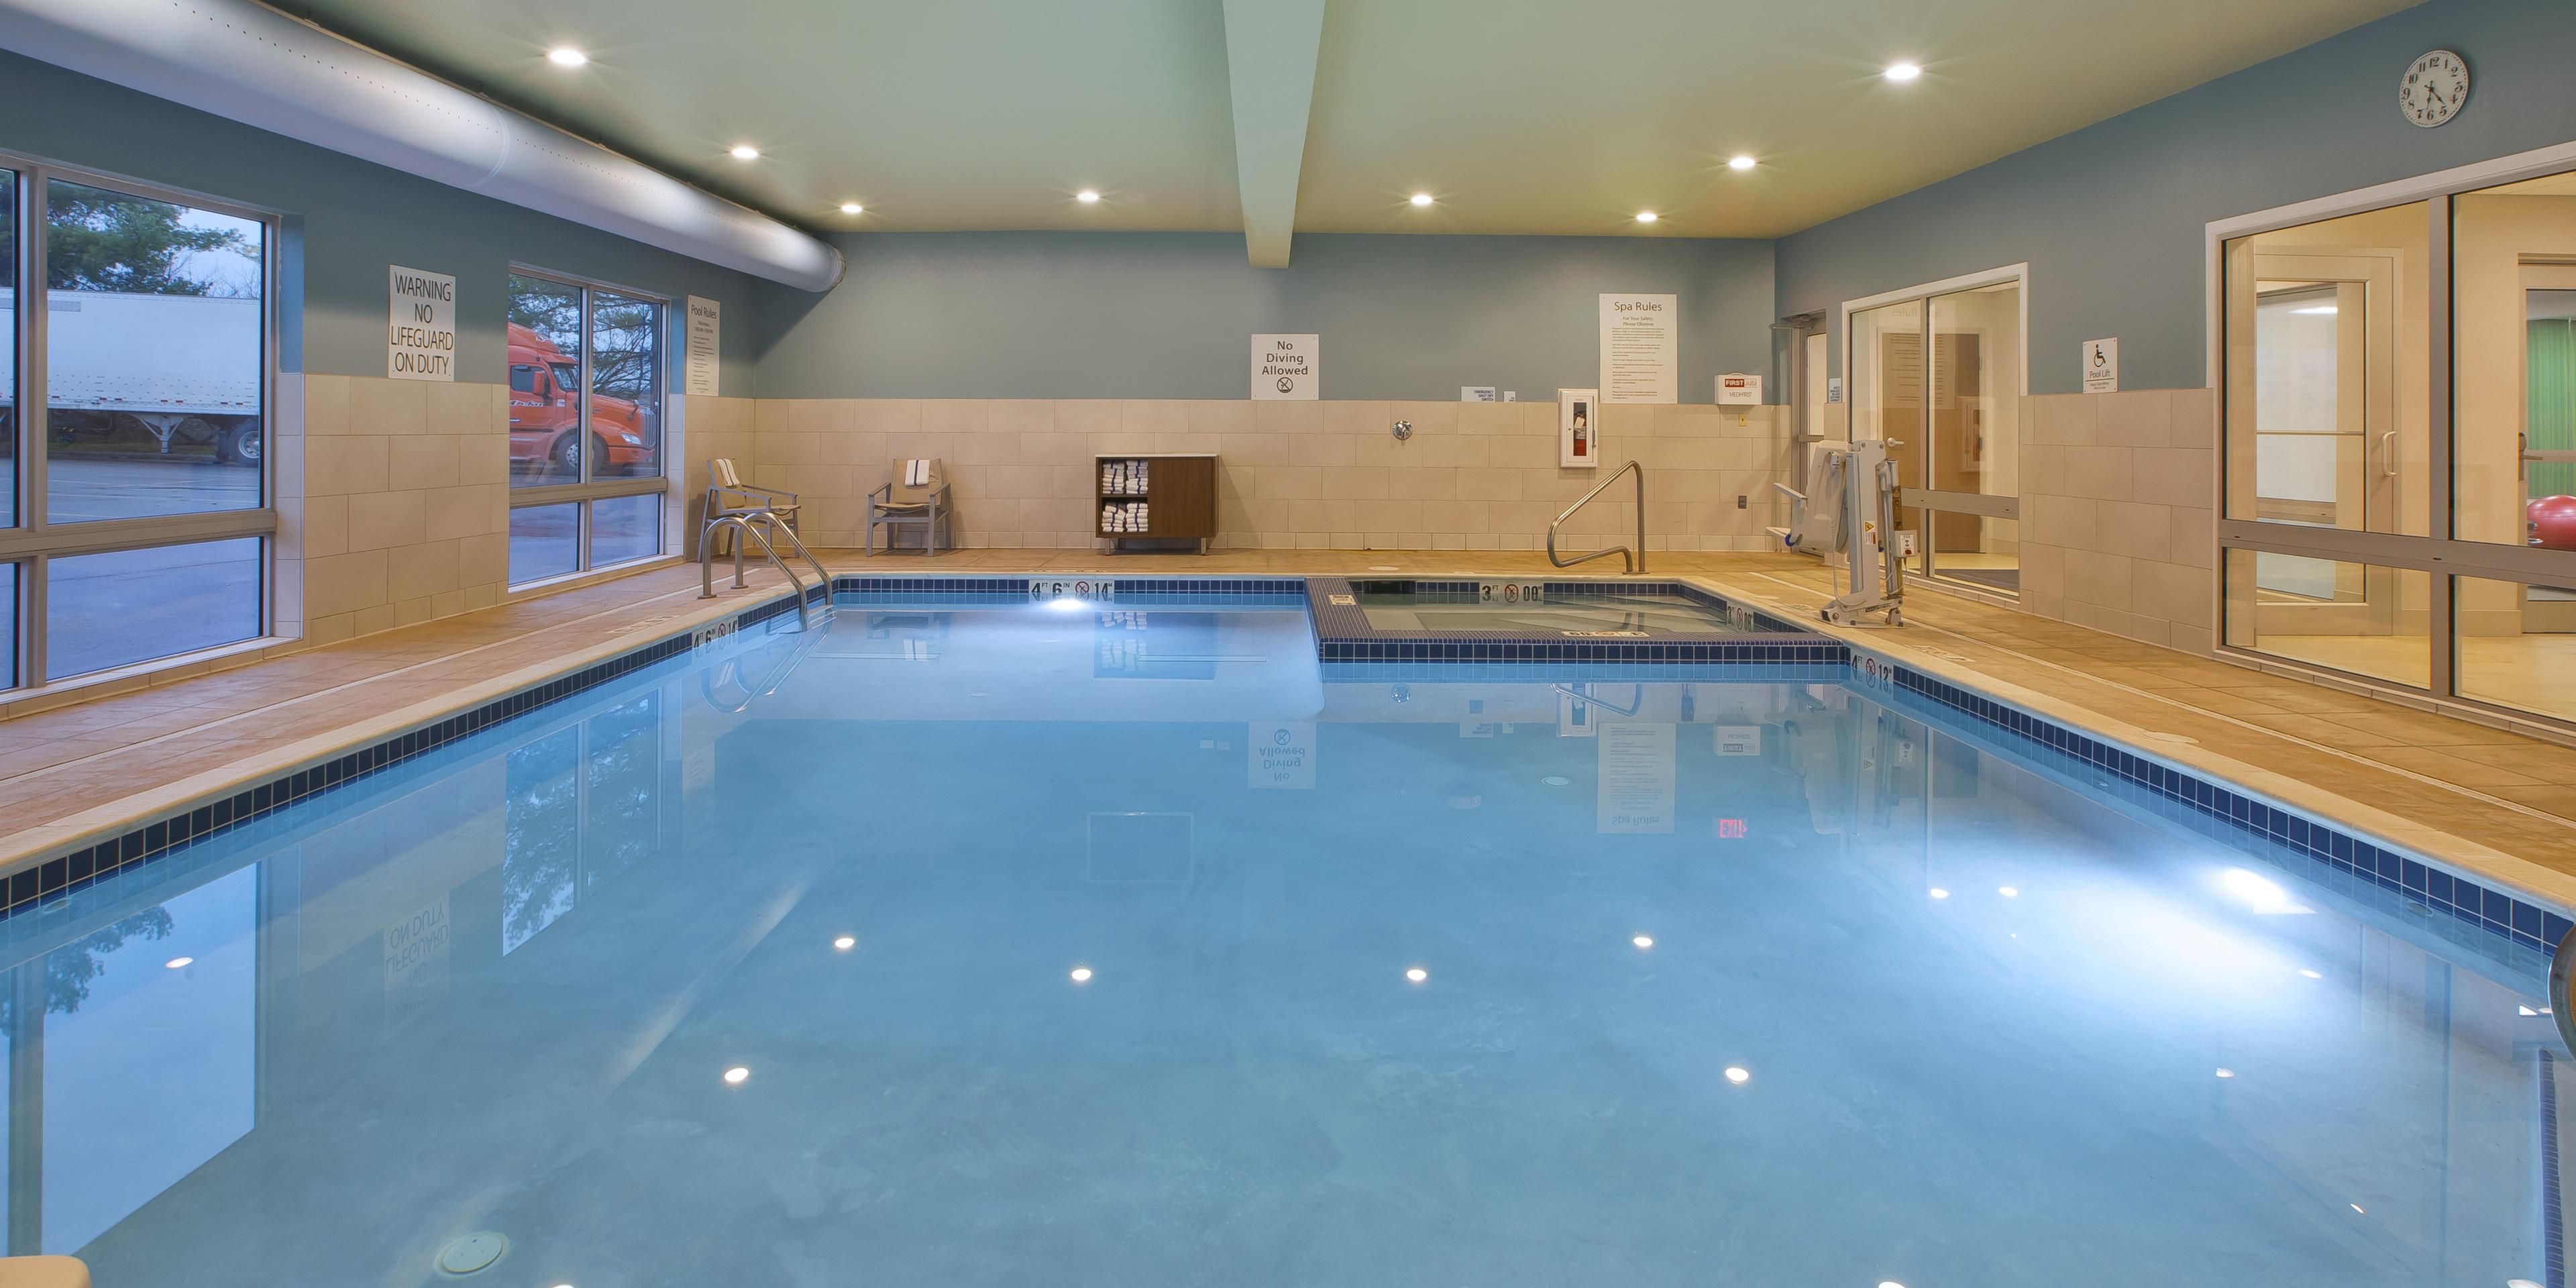 Book your room today and enjoy our pool and hot tub. Pool and hot tub is open from 6am to midnight!